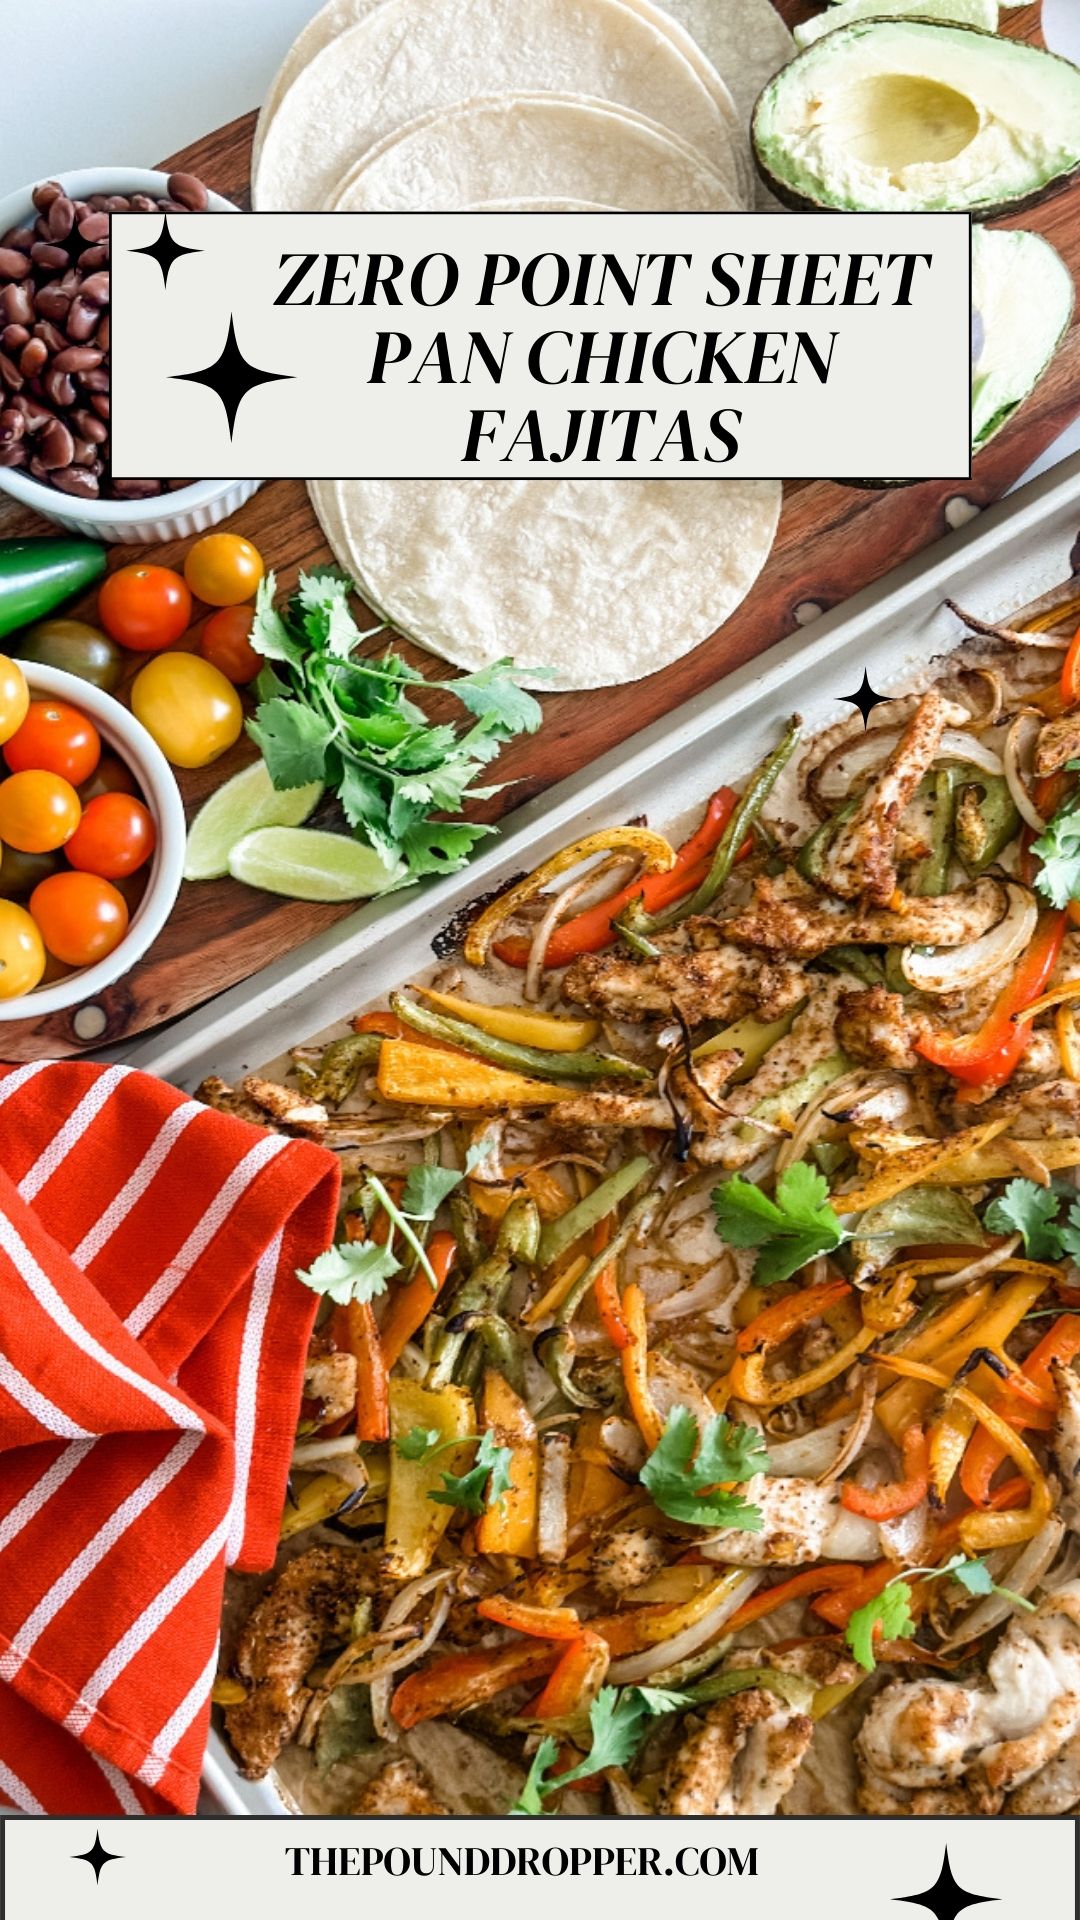 These Zero Point Sheet Pan Chicken Fajitas is a quick and easy family friendly recipe! These chicken fajitas are seasoned with a super flavorful homemade fajita seasoning-and are baked on a baking sheet making for minimal prep and minimal clean up! They are guaranteed to become a family favorite!  via @pounddropper